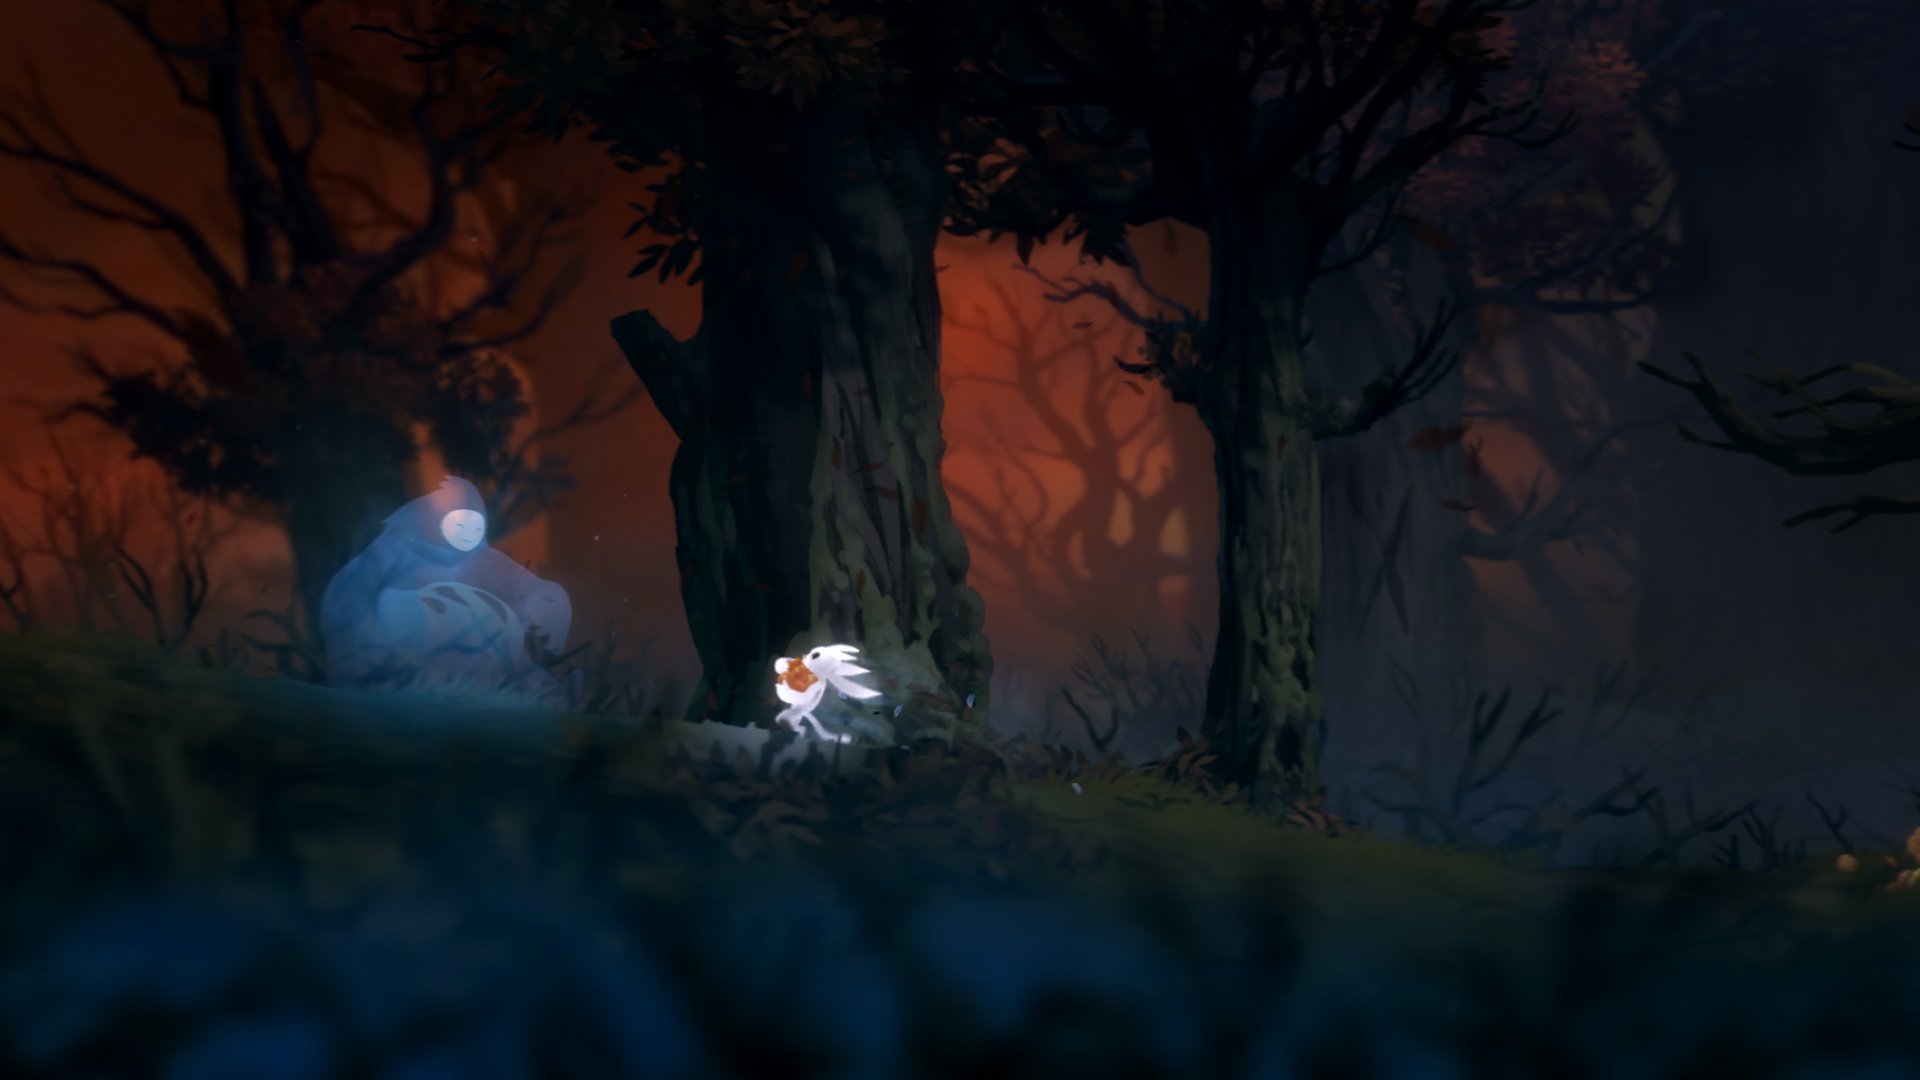 Ori And The Blind Forest Puter Wallpaper Desktop